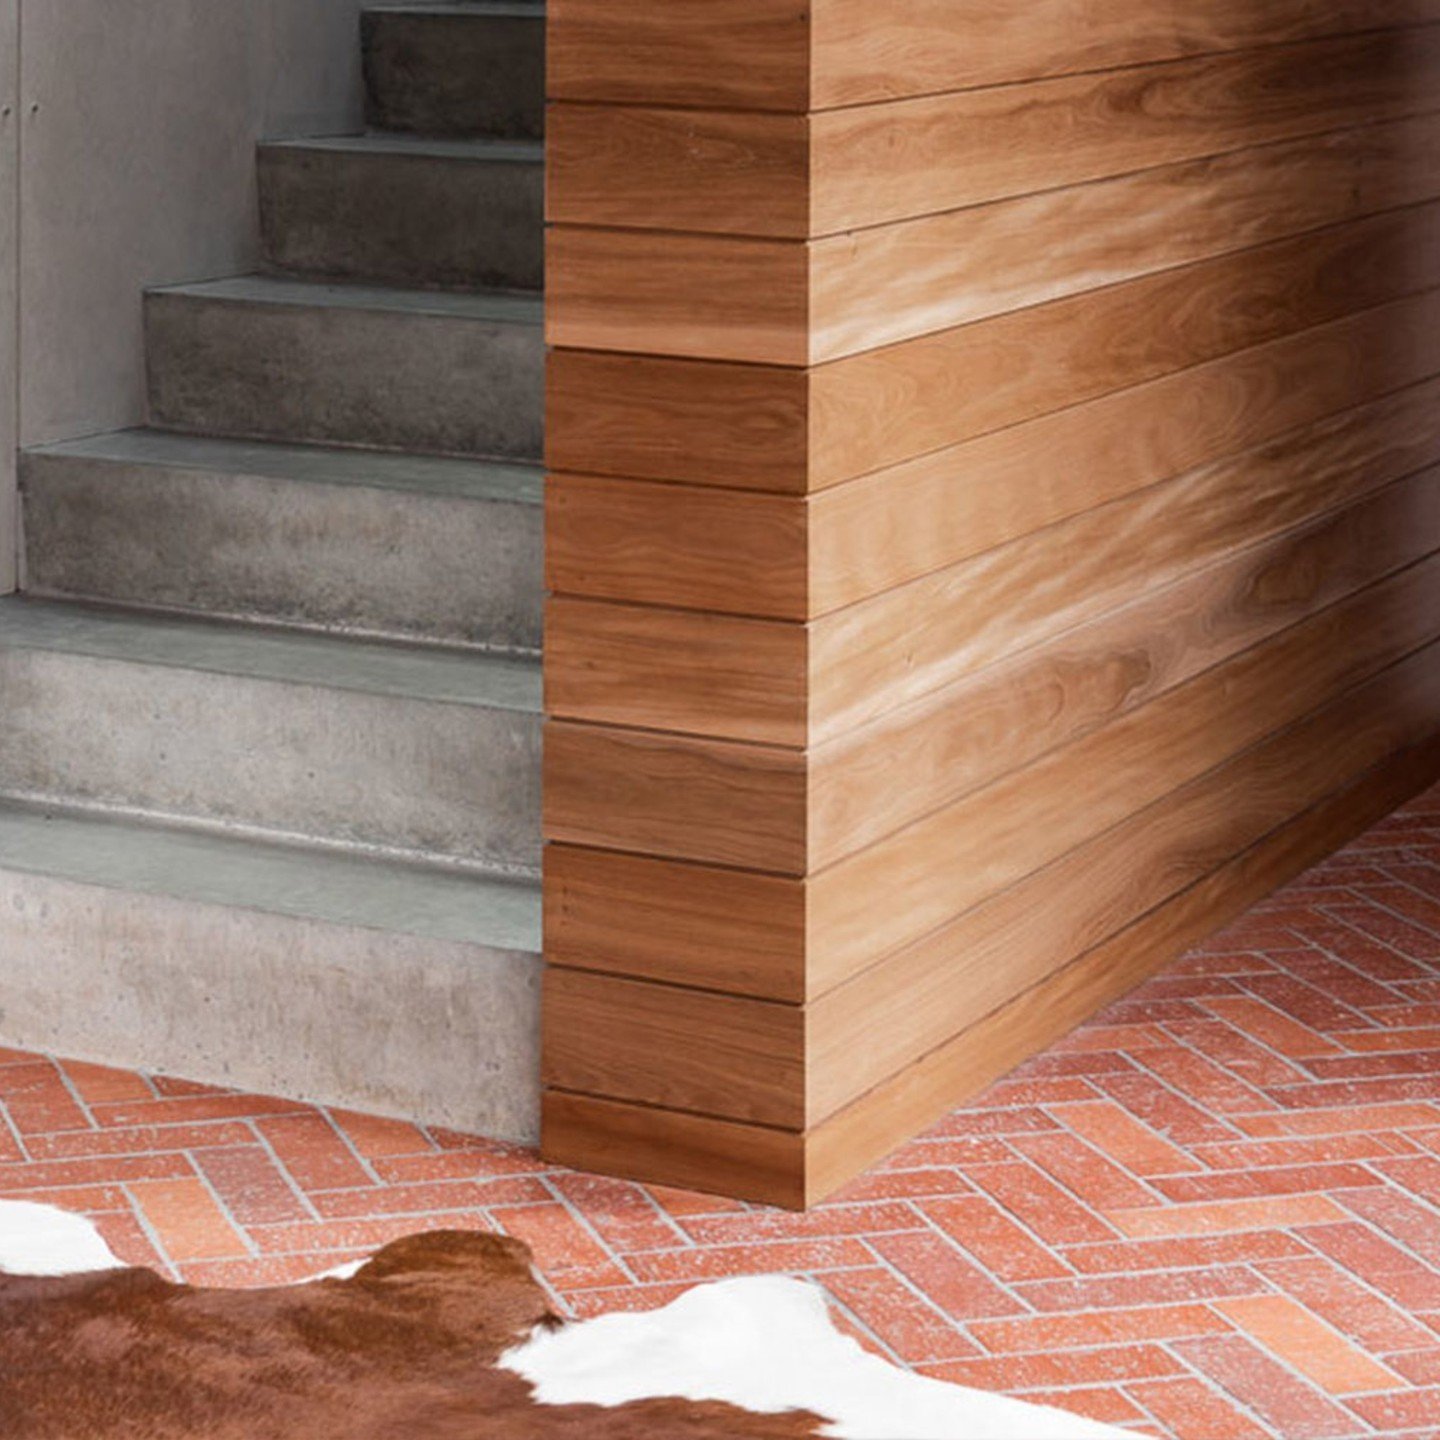 With the versatility to be laid vertically as wall tiles or horizontally as pavers, Krause Rustic Brick Tiles are a flexible solution for bringing the texture and vibrancy of handmade brick to any project.